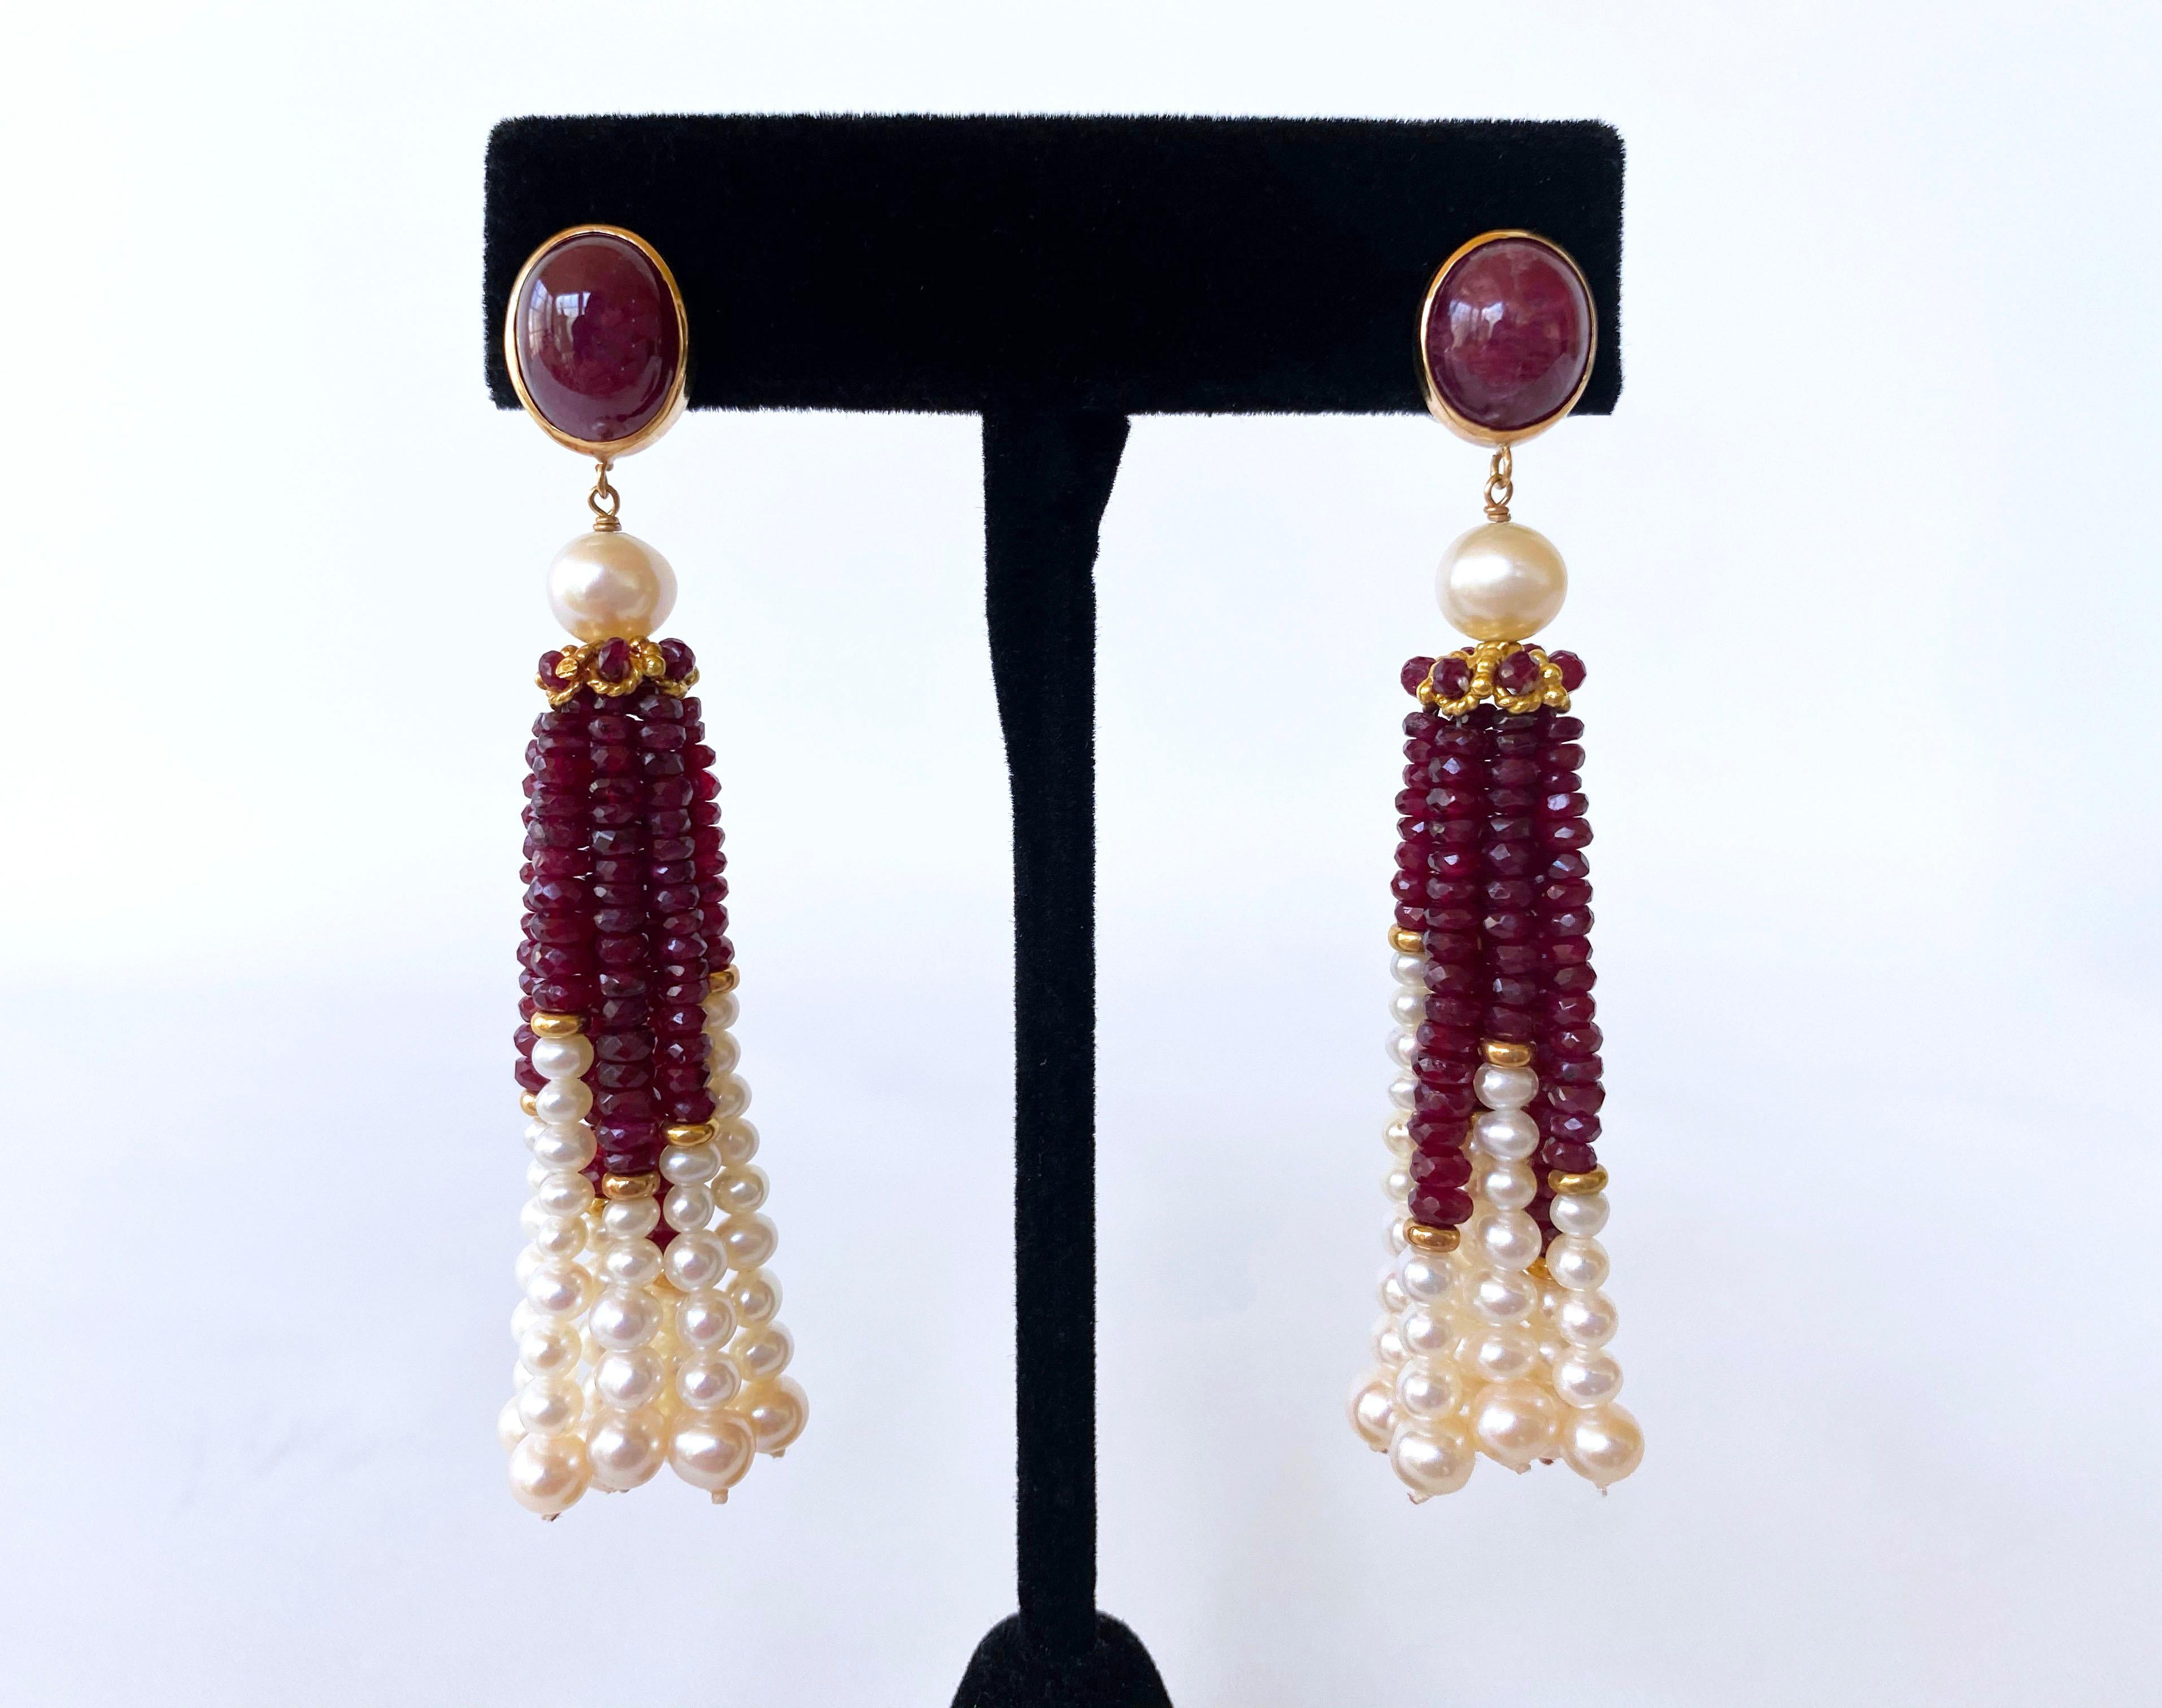 Gorgeous pair of Tassel Earrings by Marina J. This lovely pair features two large oval cabochon Ruby stones (9mm x 10mm), bezel set in 14k Yellow Gold. A beautiful round 7mm Pearl sits atop a 14k Yellow Gold cup decorated with Rubies, from which